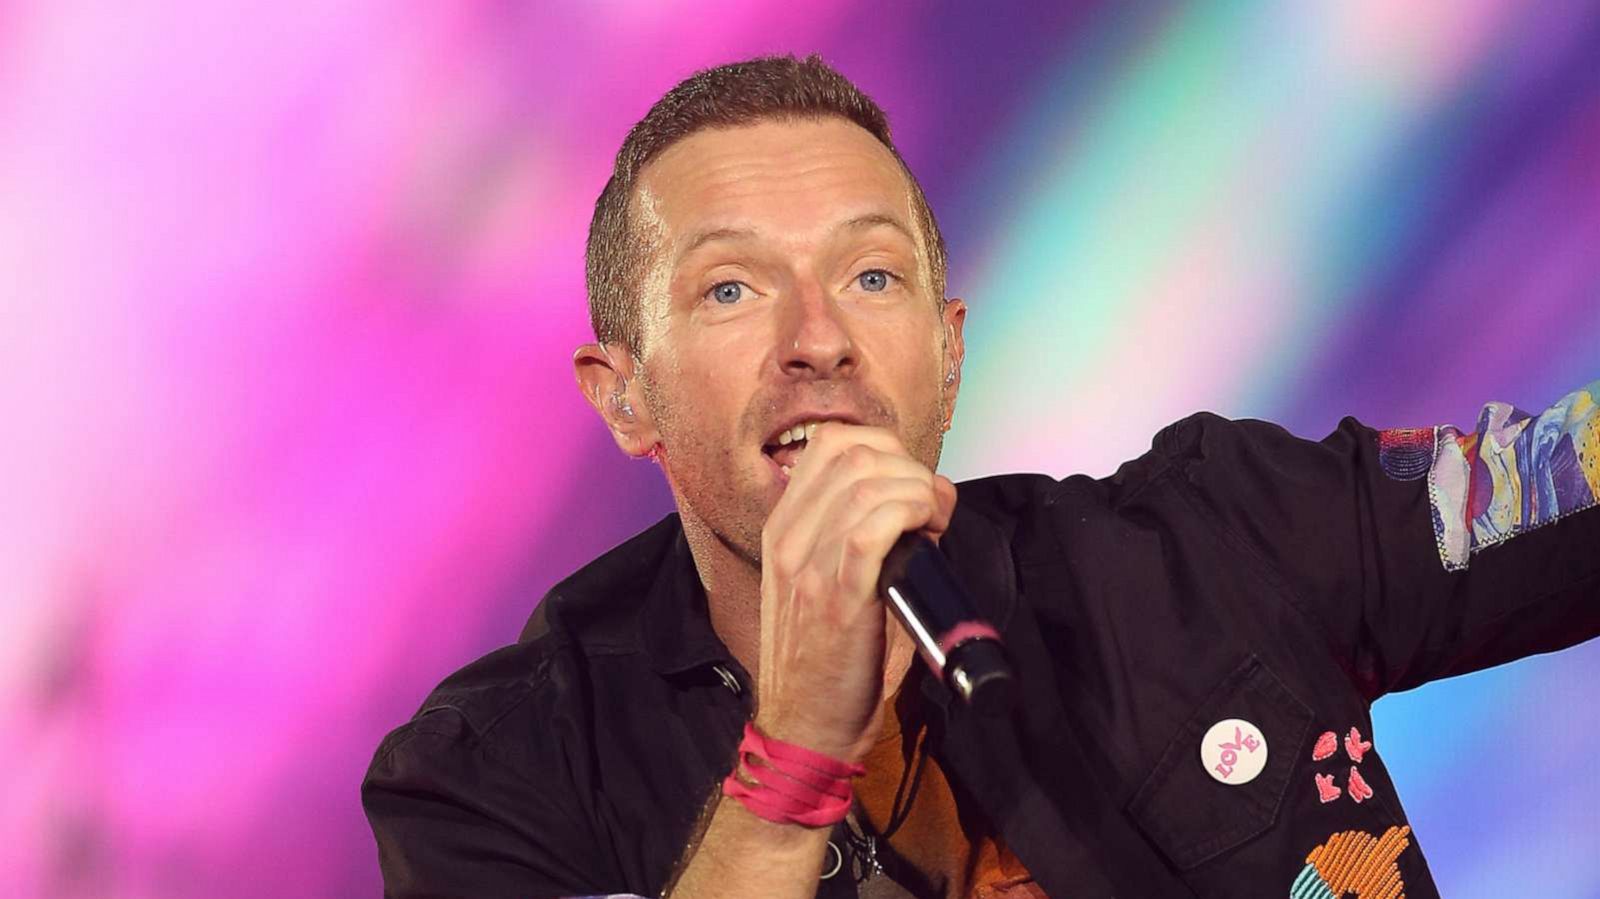 Chris Martin - Coldplay, Songs & Wife